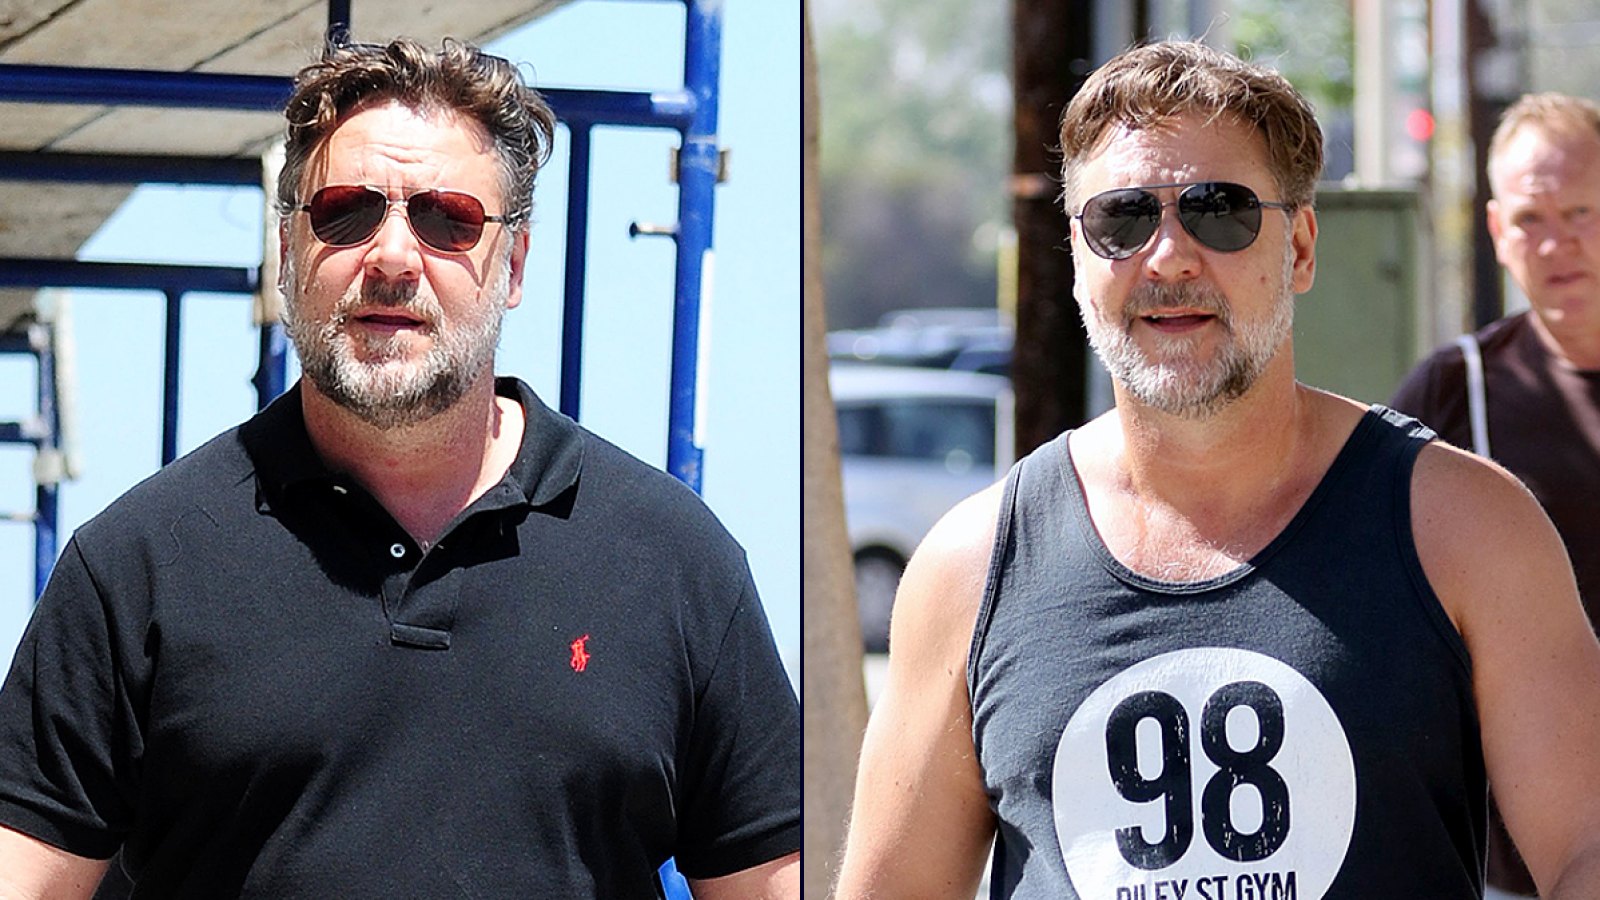 Russell Crowe goes for a run February 27, 2016.